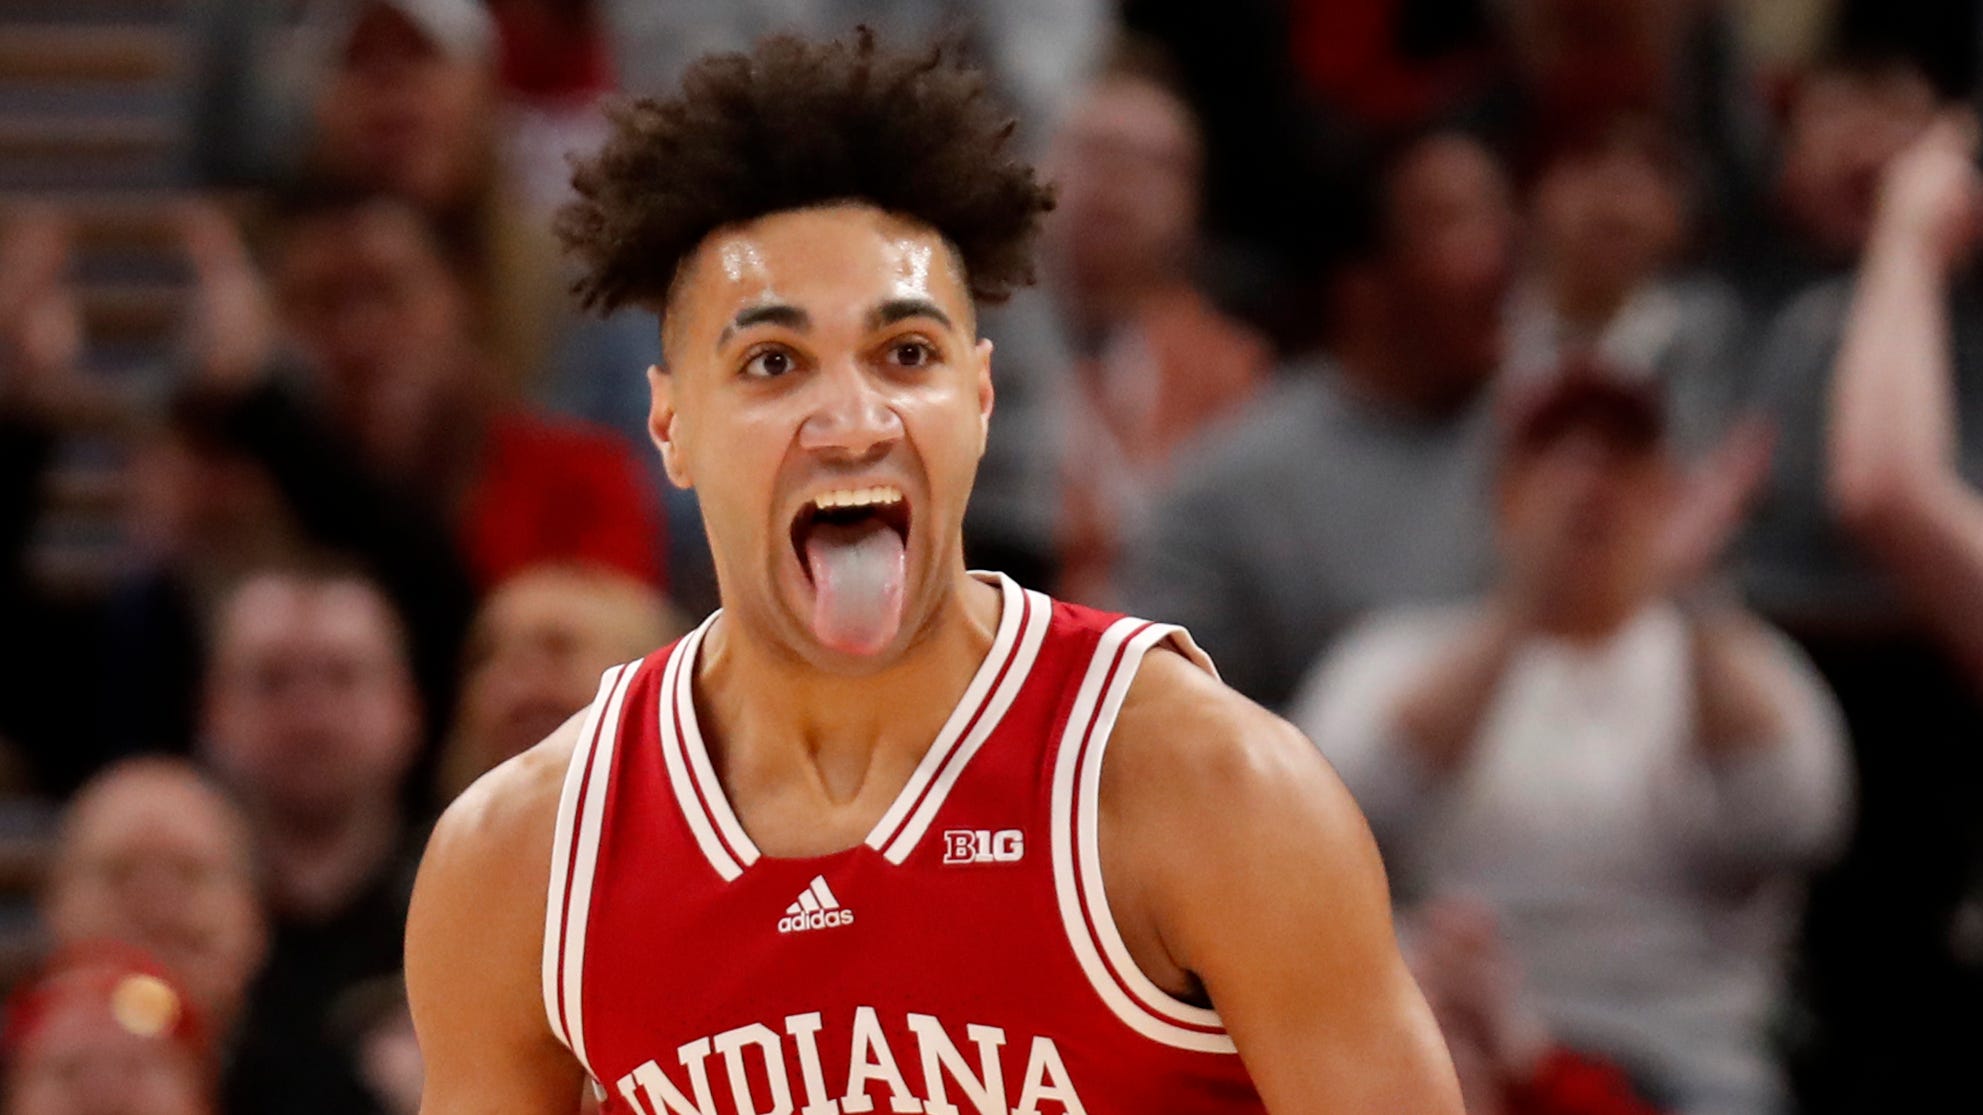 indiana-basketball-schedule-for-2022-23-includes-two-games-vs-purdue